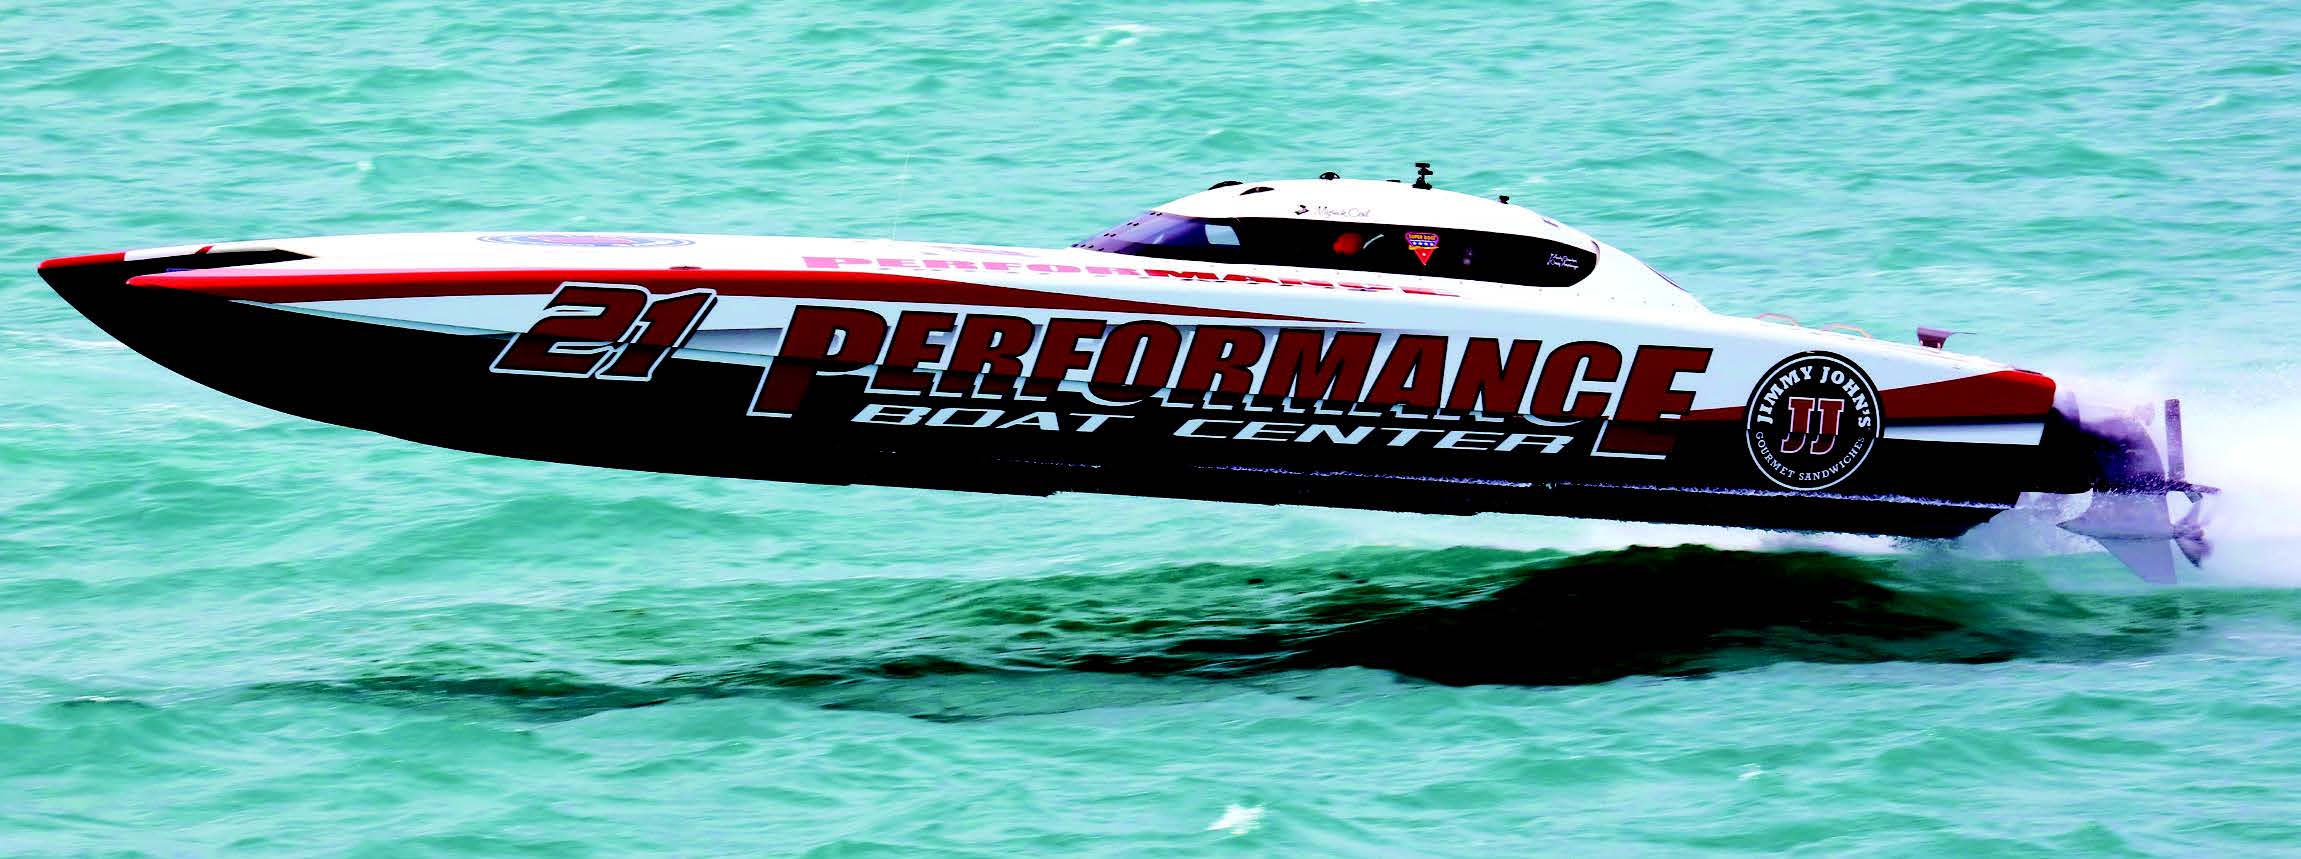 With John Tomlinson on the throttles and extensive off-season testing, the Performance Boat Center team will be serious contenders.